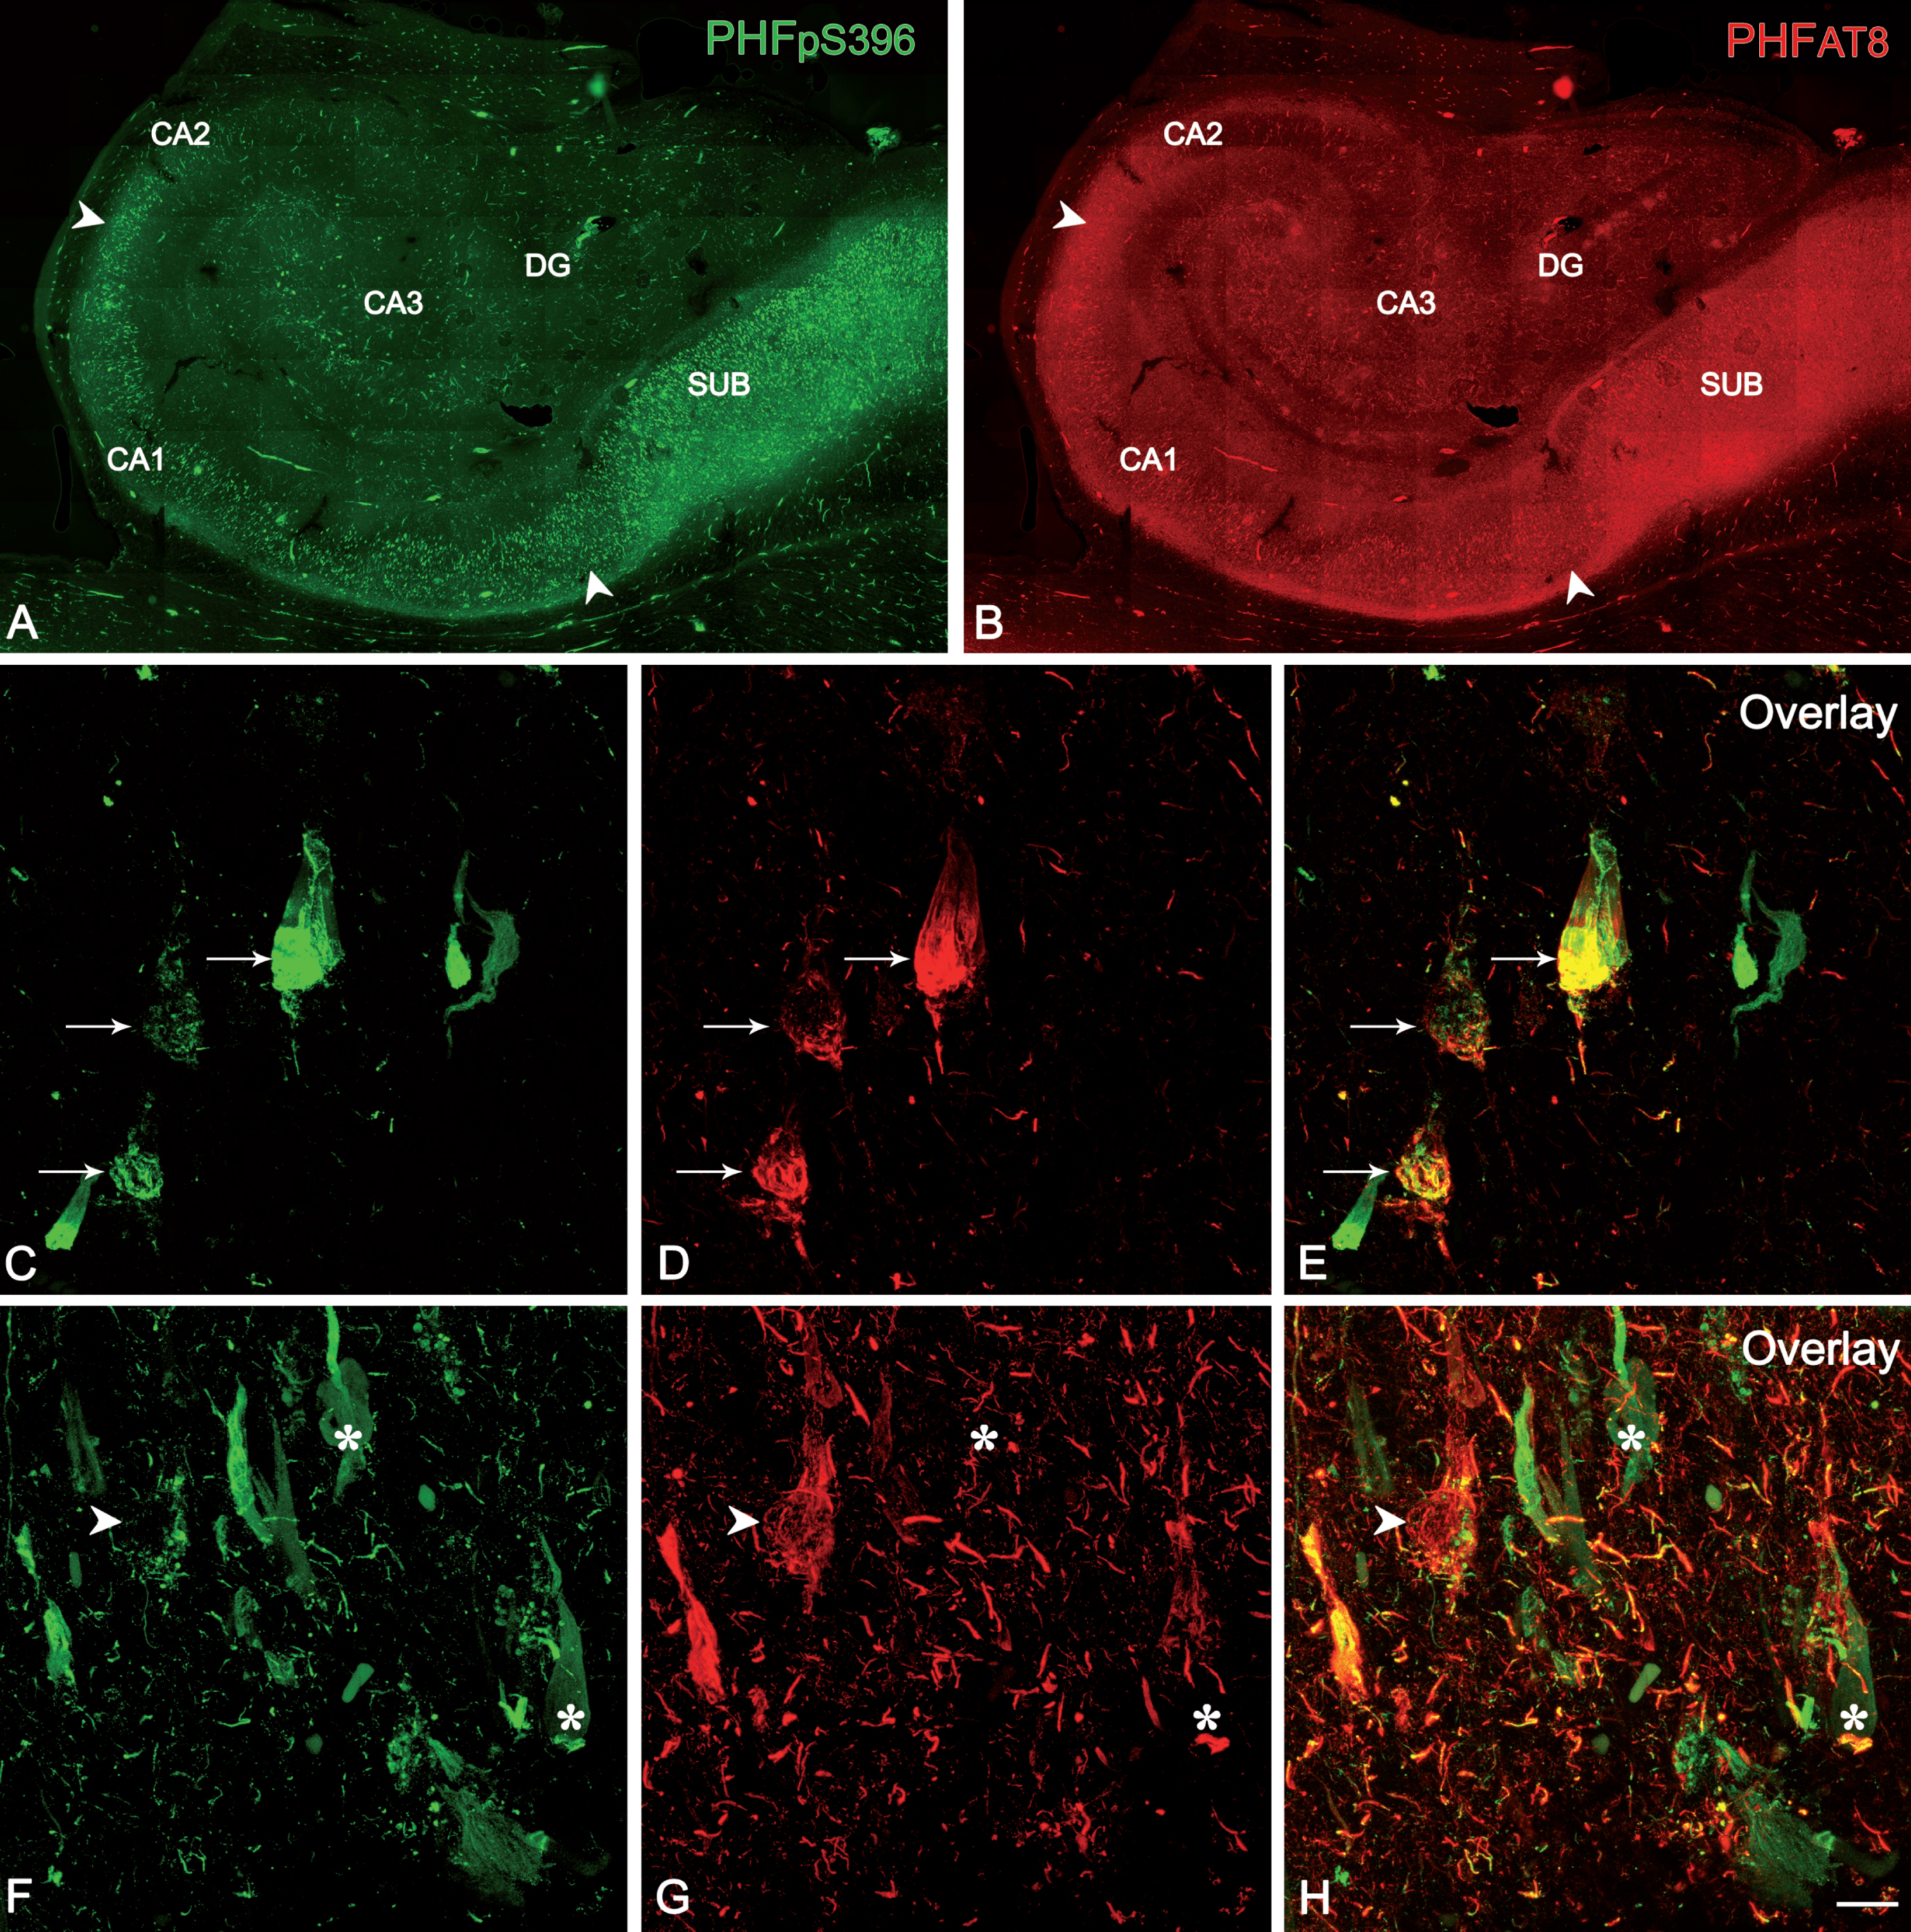 Confocal stack projection images to illustrate labeling patterns of neurons in double-immunostained sections for PHFpS396 and PHFAT8. Low-power confocal images of the hippocampal formation showing immunostaining for PHFpS396 (A, in green) and PHFAT8 (B, in red). Arrowheads indicate CA1 boundaries. C–H) Trios of confocal stack projection images taken from PHFpS396/PHFAT8 double-immunostained sections. Arrows designate neurons expressing both anti-PHFpS396 and anti-PHFAT8 (C–E). Arrowheads indicate a neuron expressing anti-PHFAT8, and asterisks indicate two neurons expressing only PHFpS396. DG, dentate gyrus; CA1–CA3, cornu ammonis fields; SUB, subiculum. Scale bar (in H): 922μm (in A, B) and 50μm (in C–H).